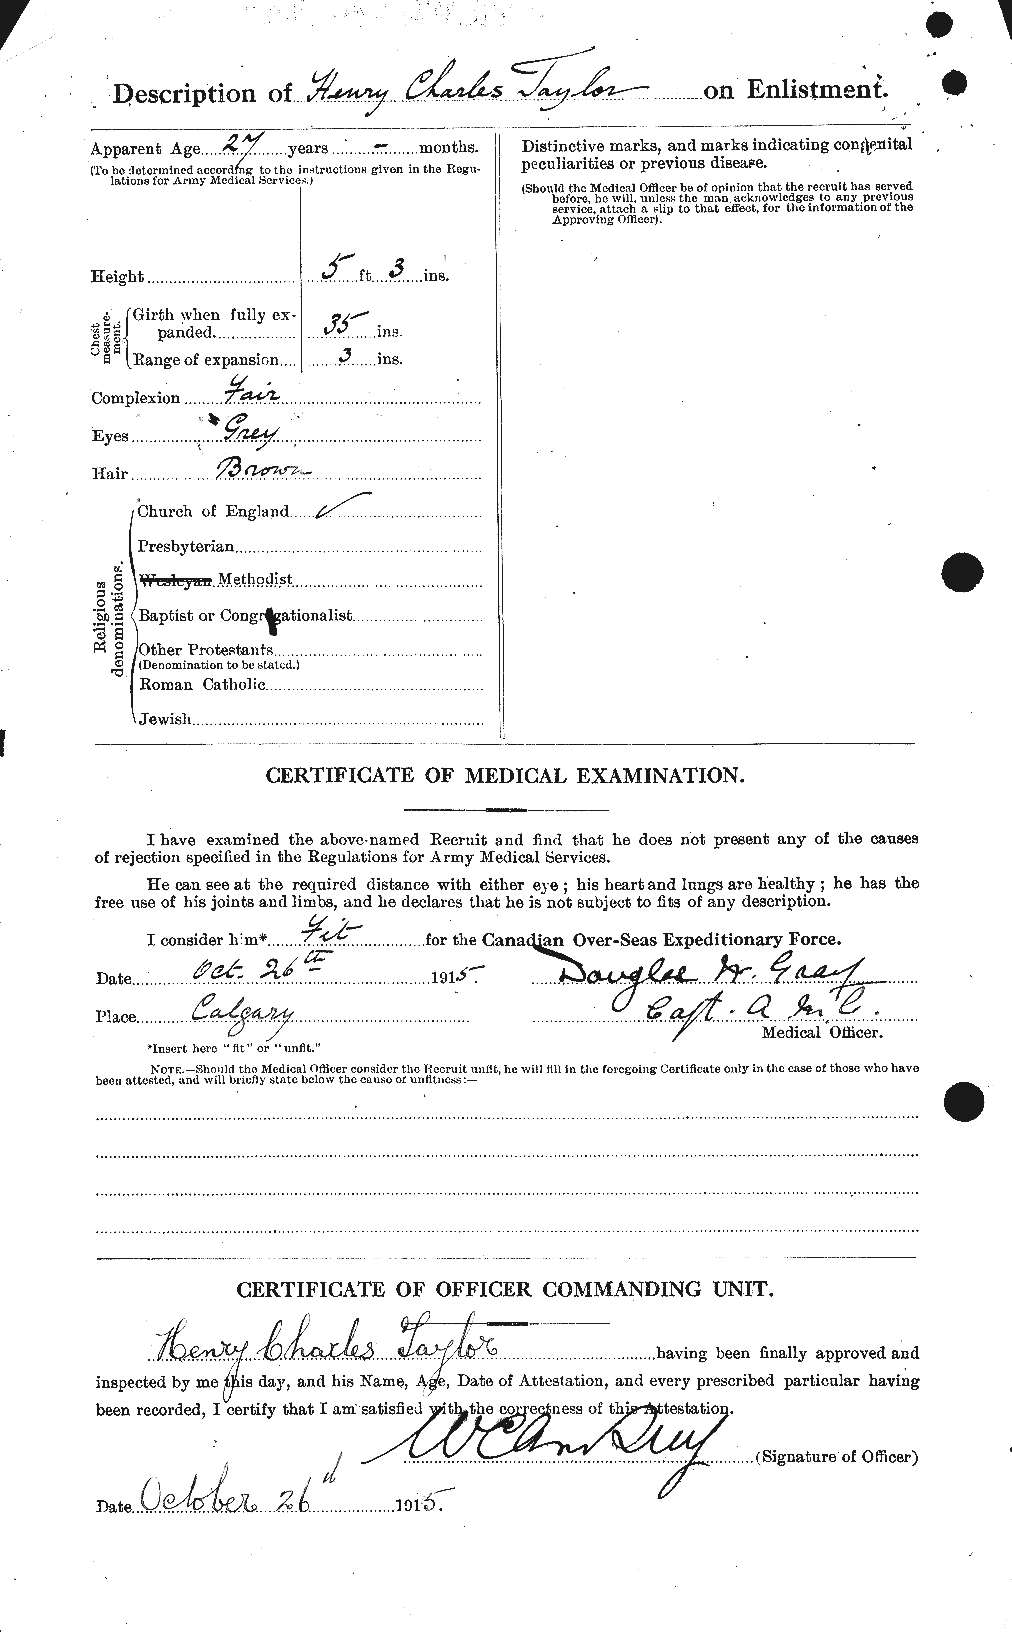 Personnel Records of the First World War - CEF 626530b